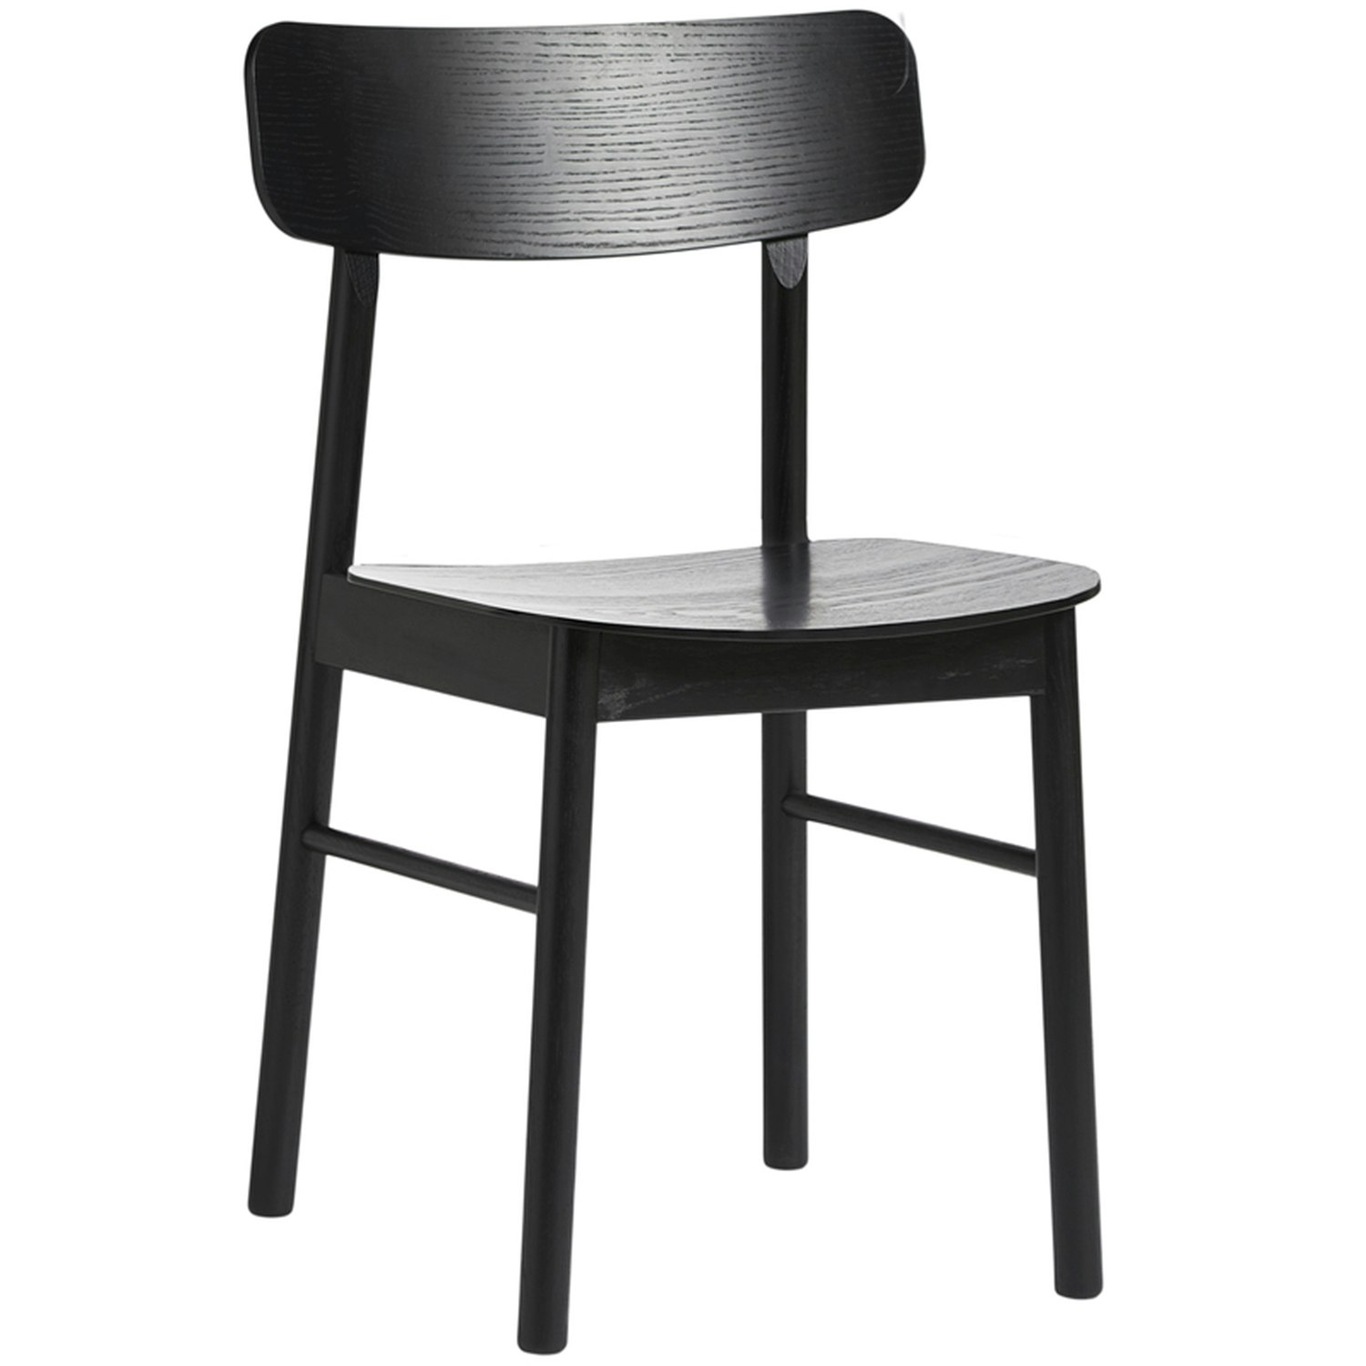 Soma Dining Chair, Black Painted Ash